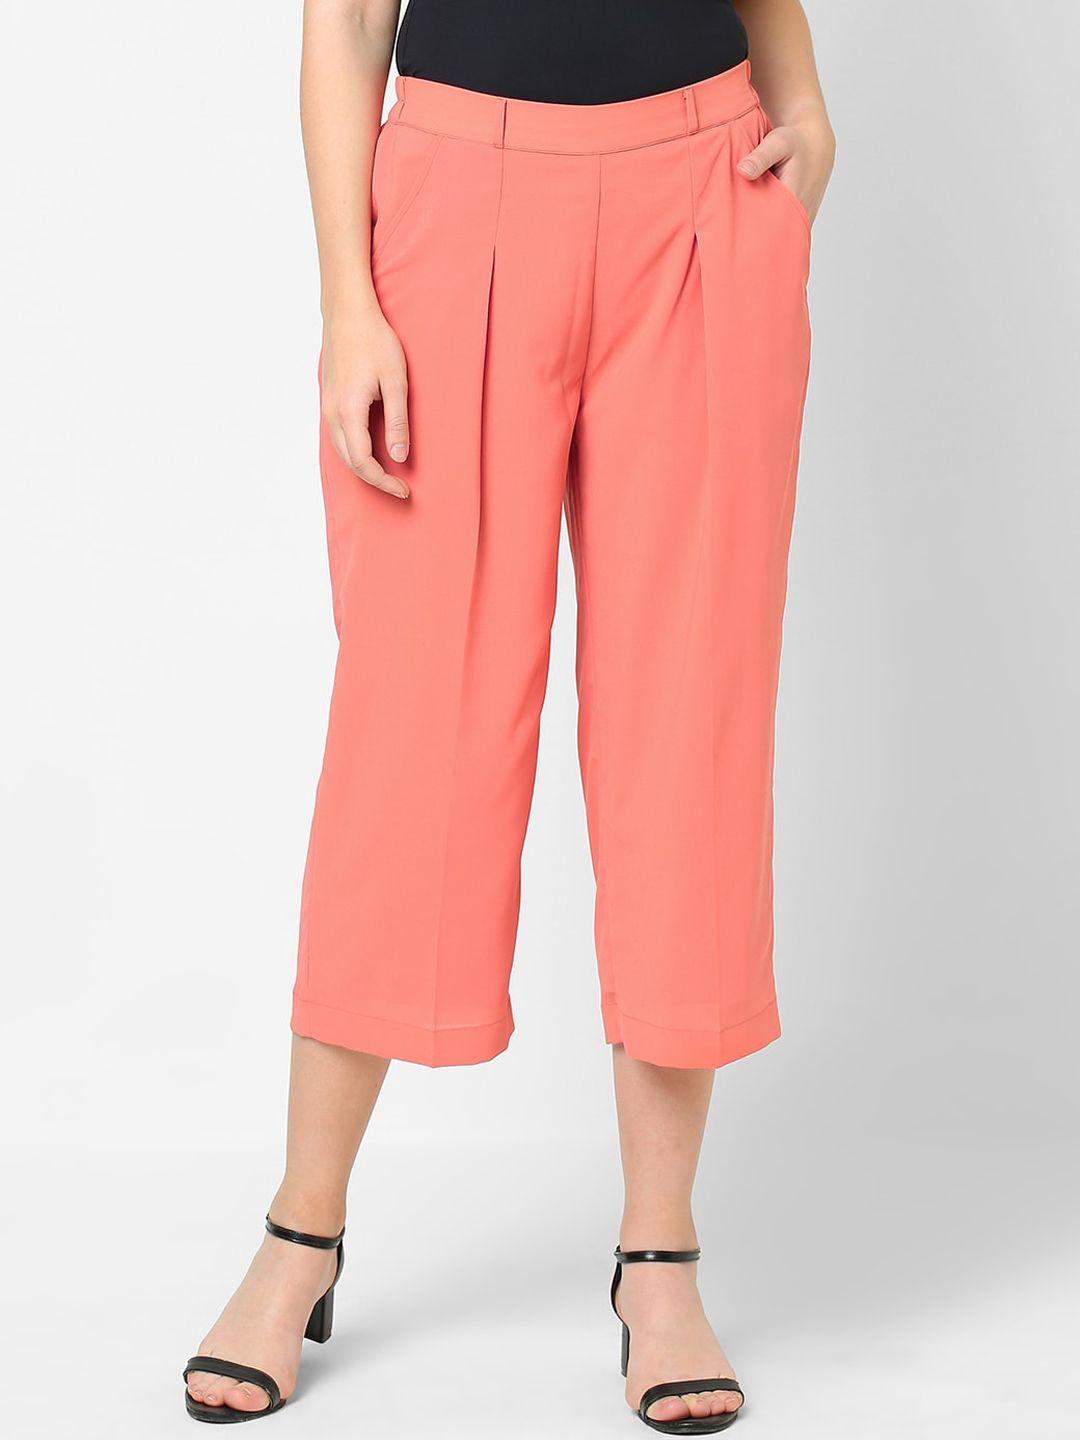 mish women peach-coloured solid comfort loose fit easy wash pleated culottes trousers